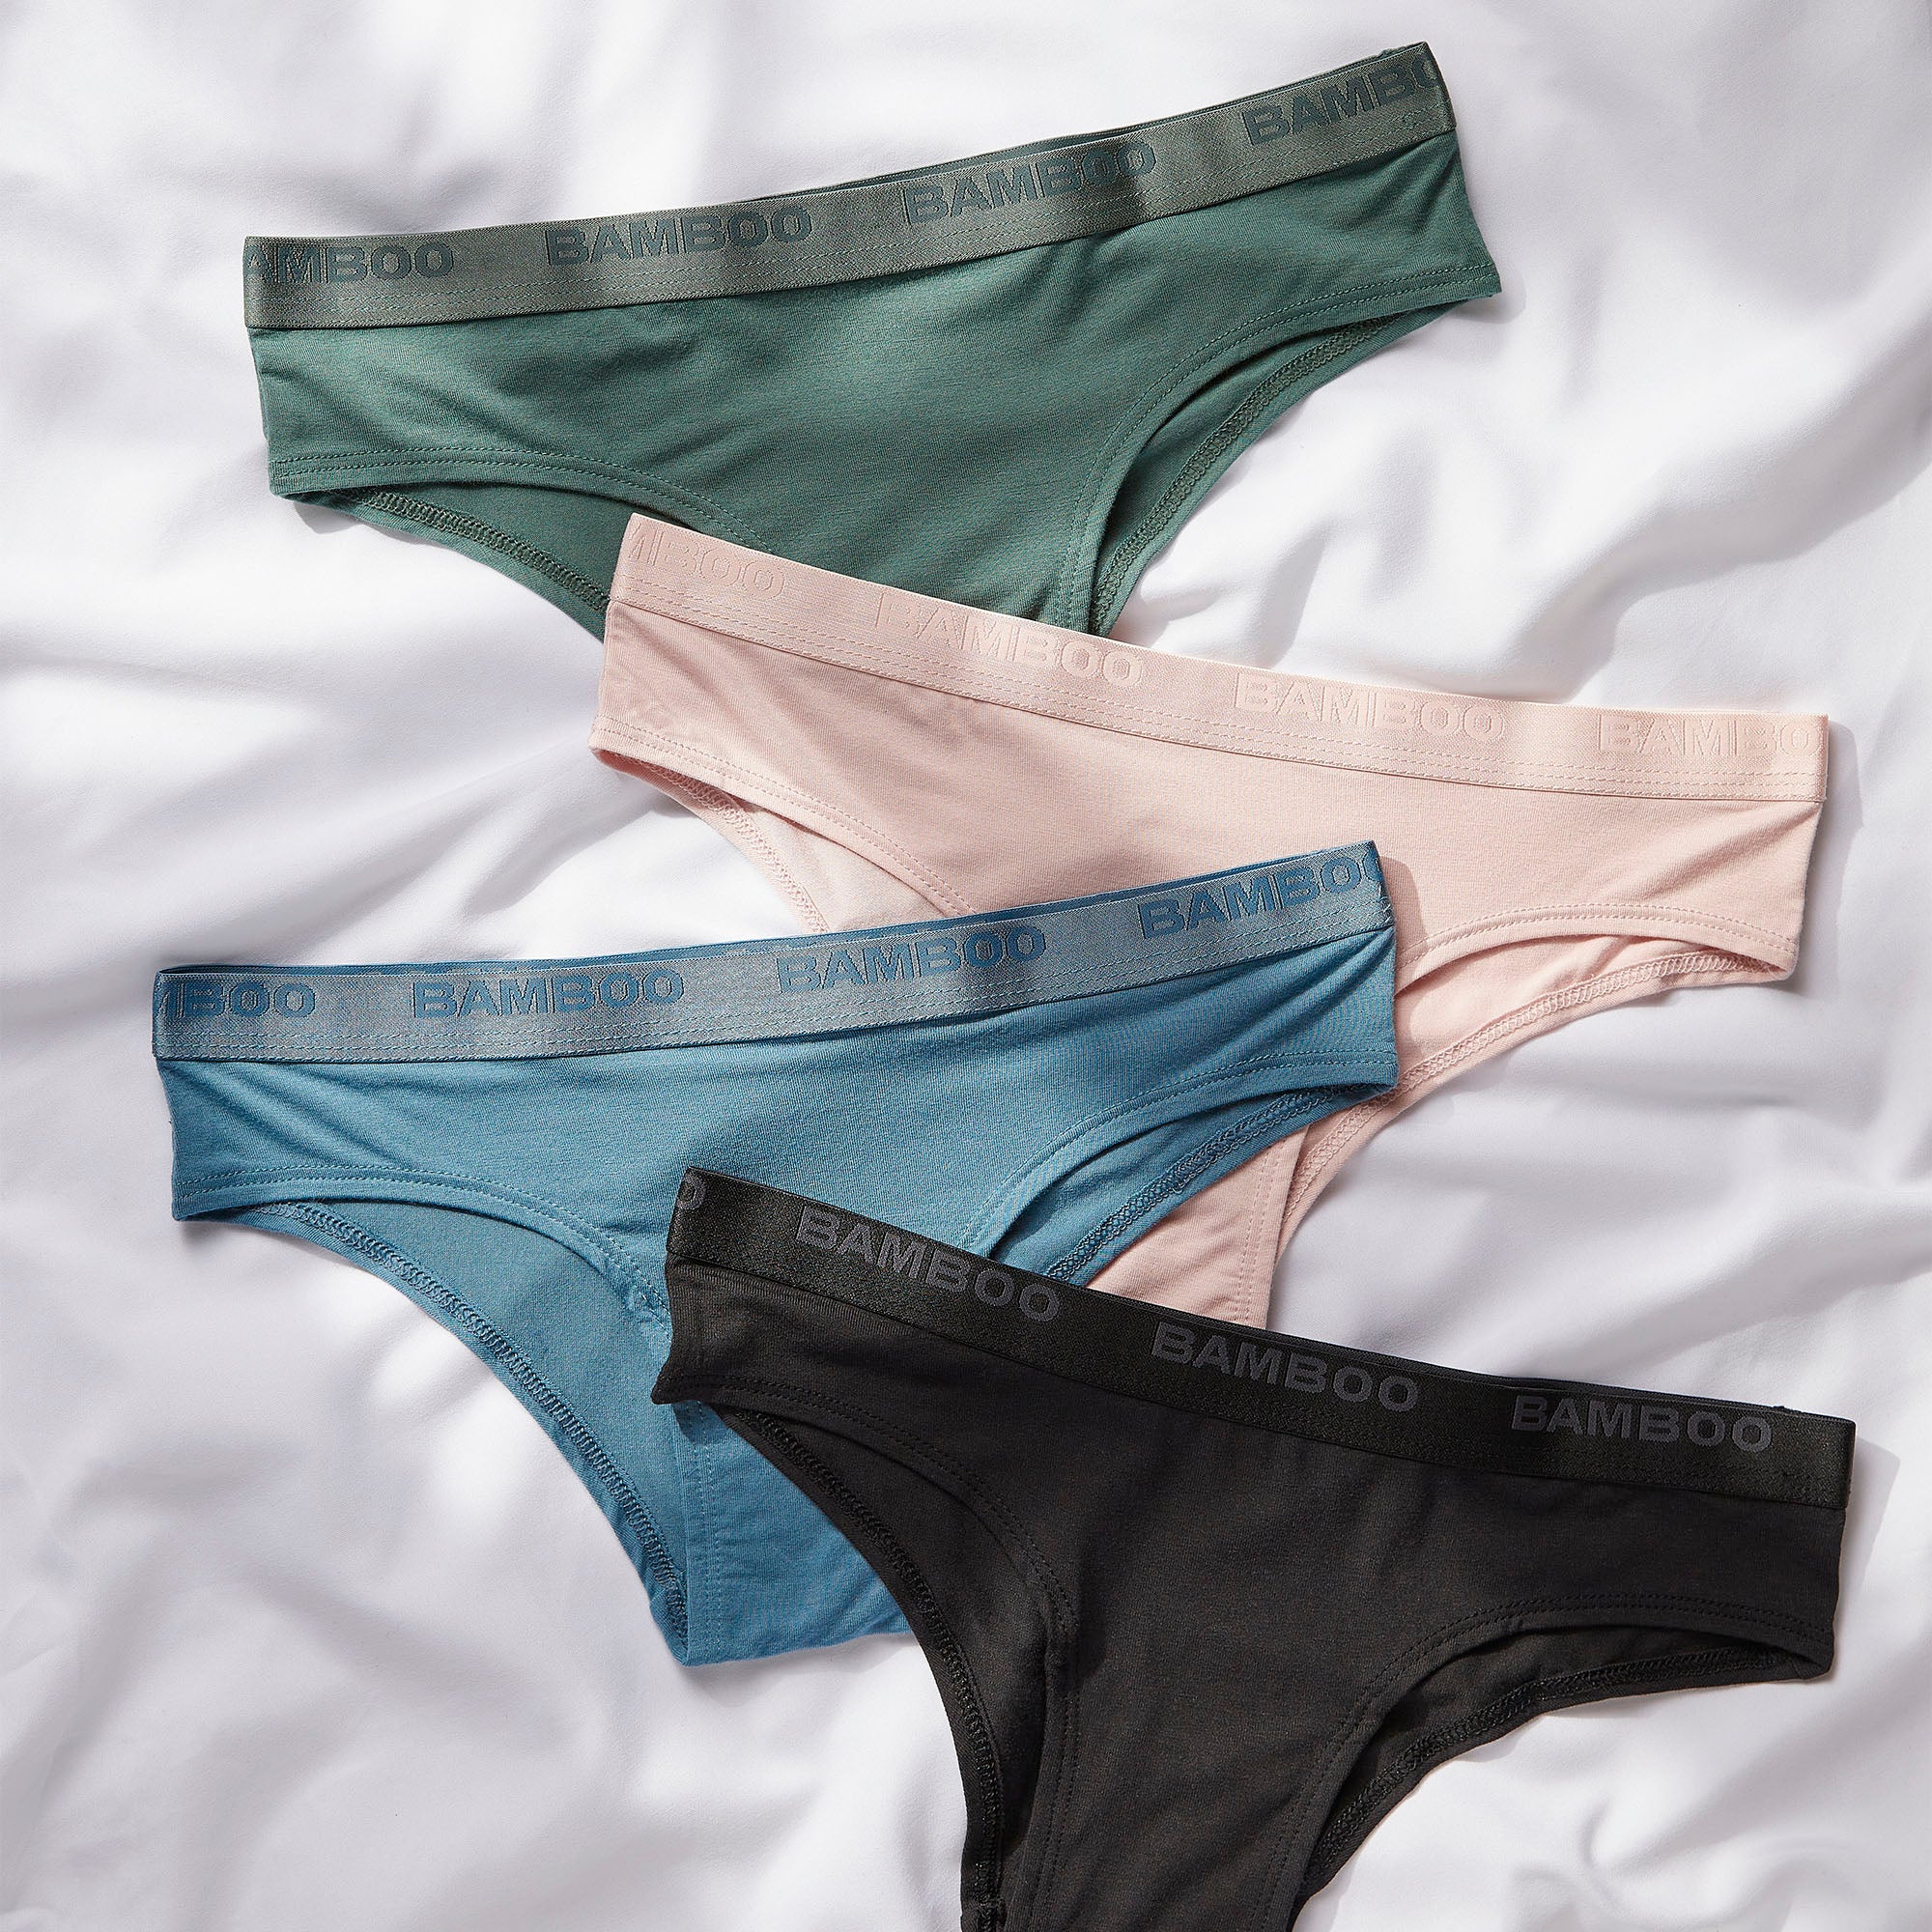 How to Make Your Underwear Last Longer